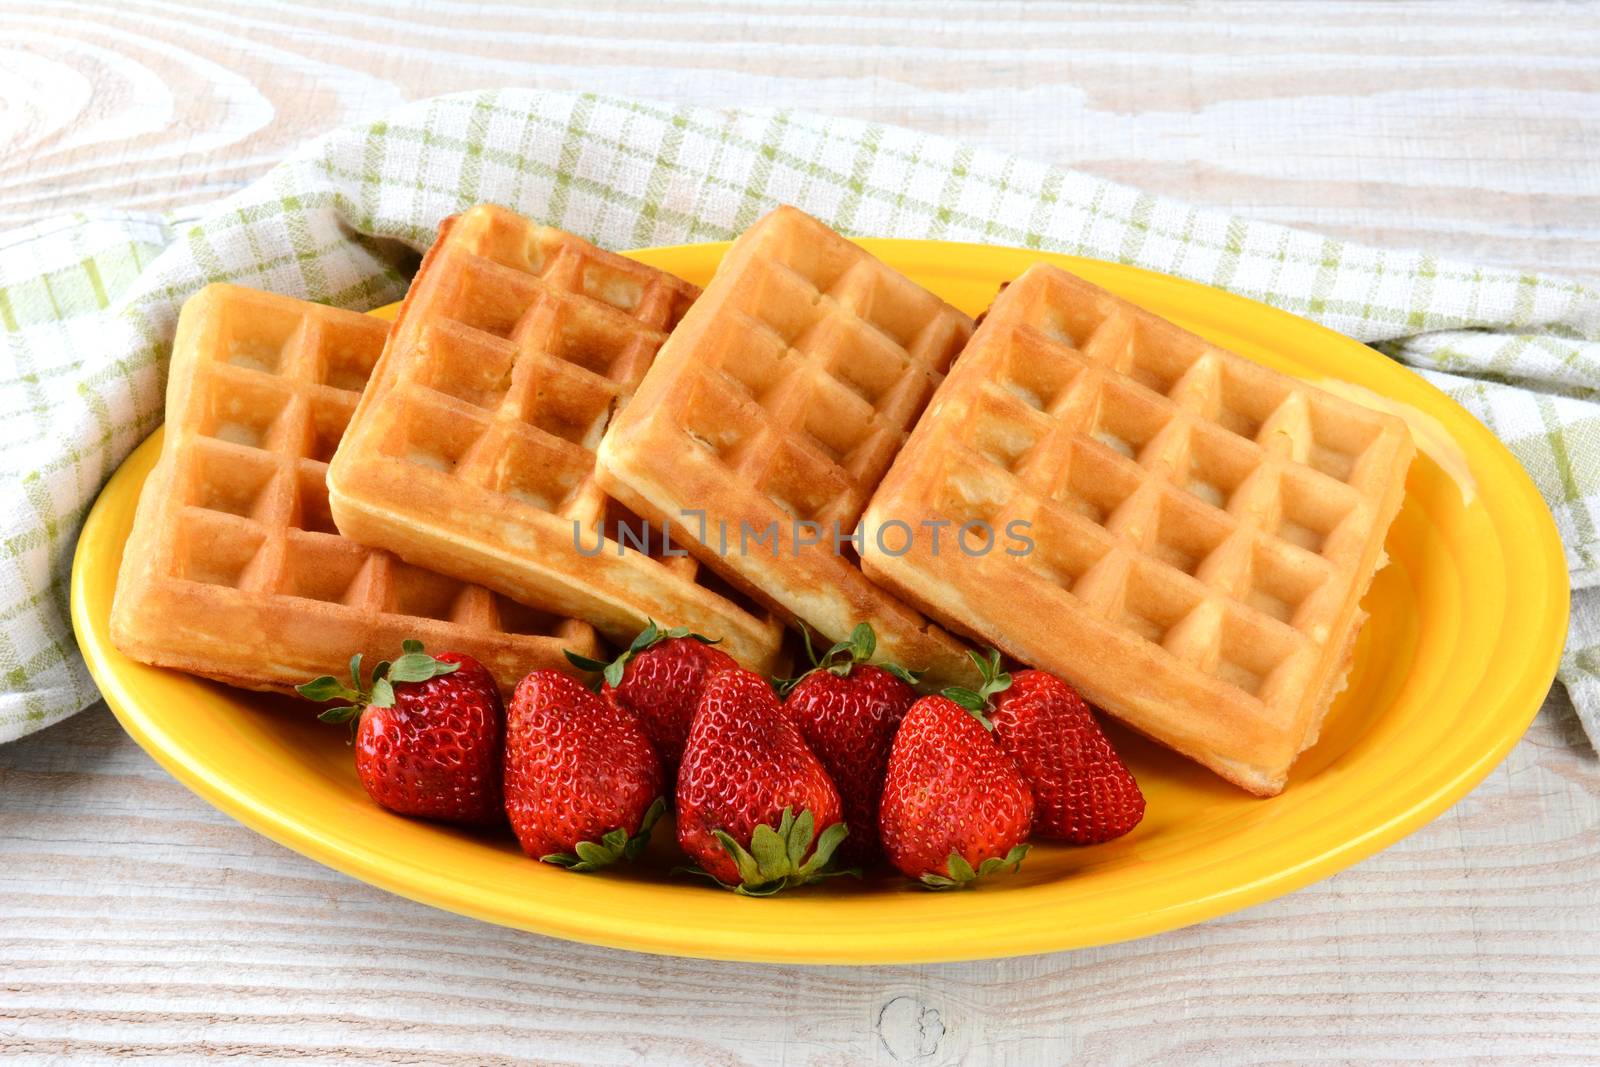 A plate of waffles and strawberries on a yellow platter. Horizontal format on a rustic wooden farmhouse style table.